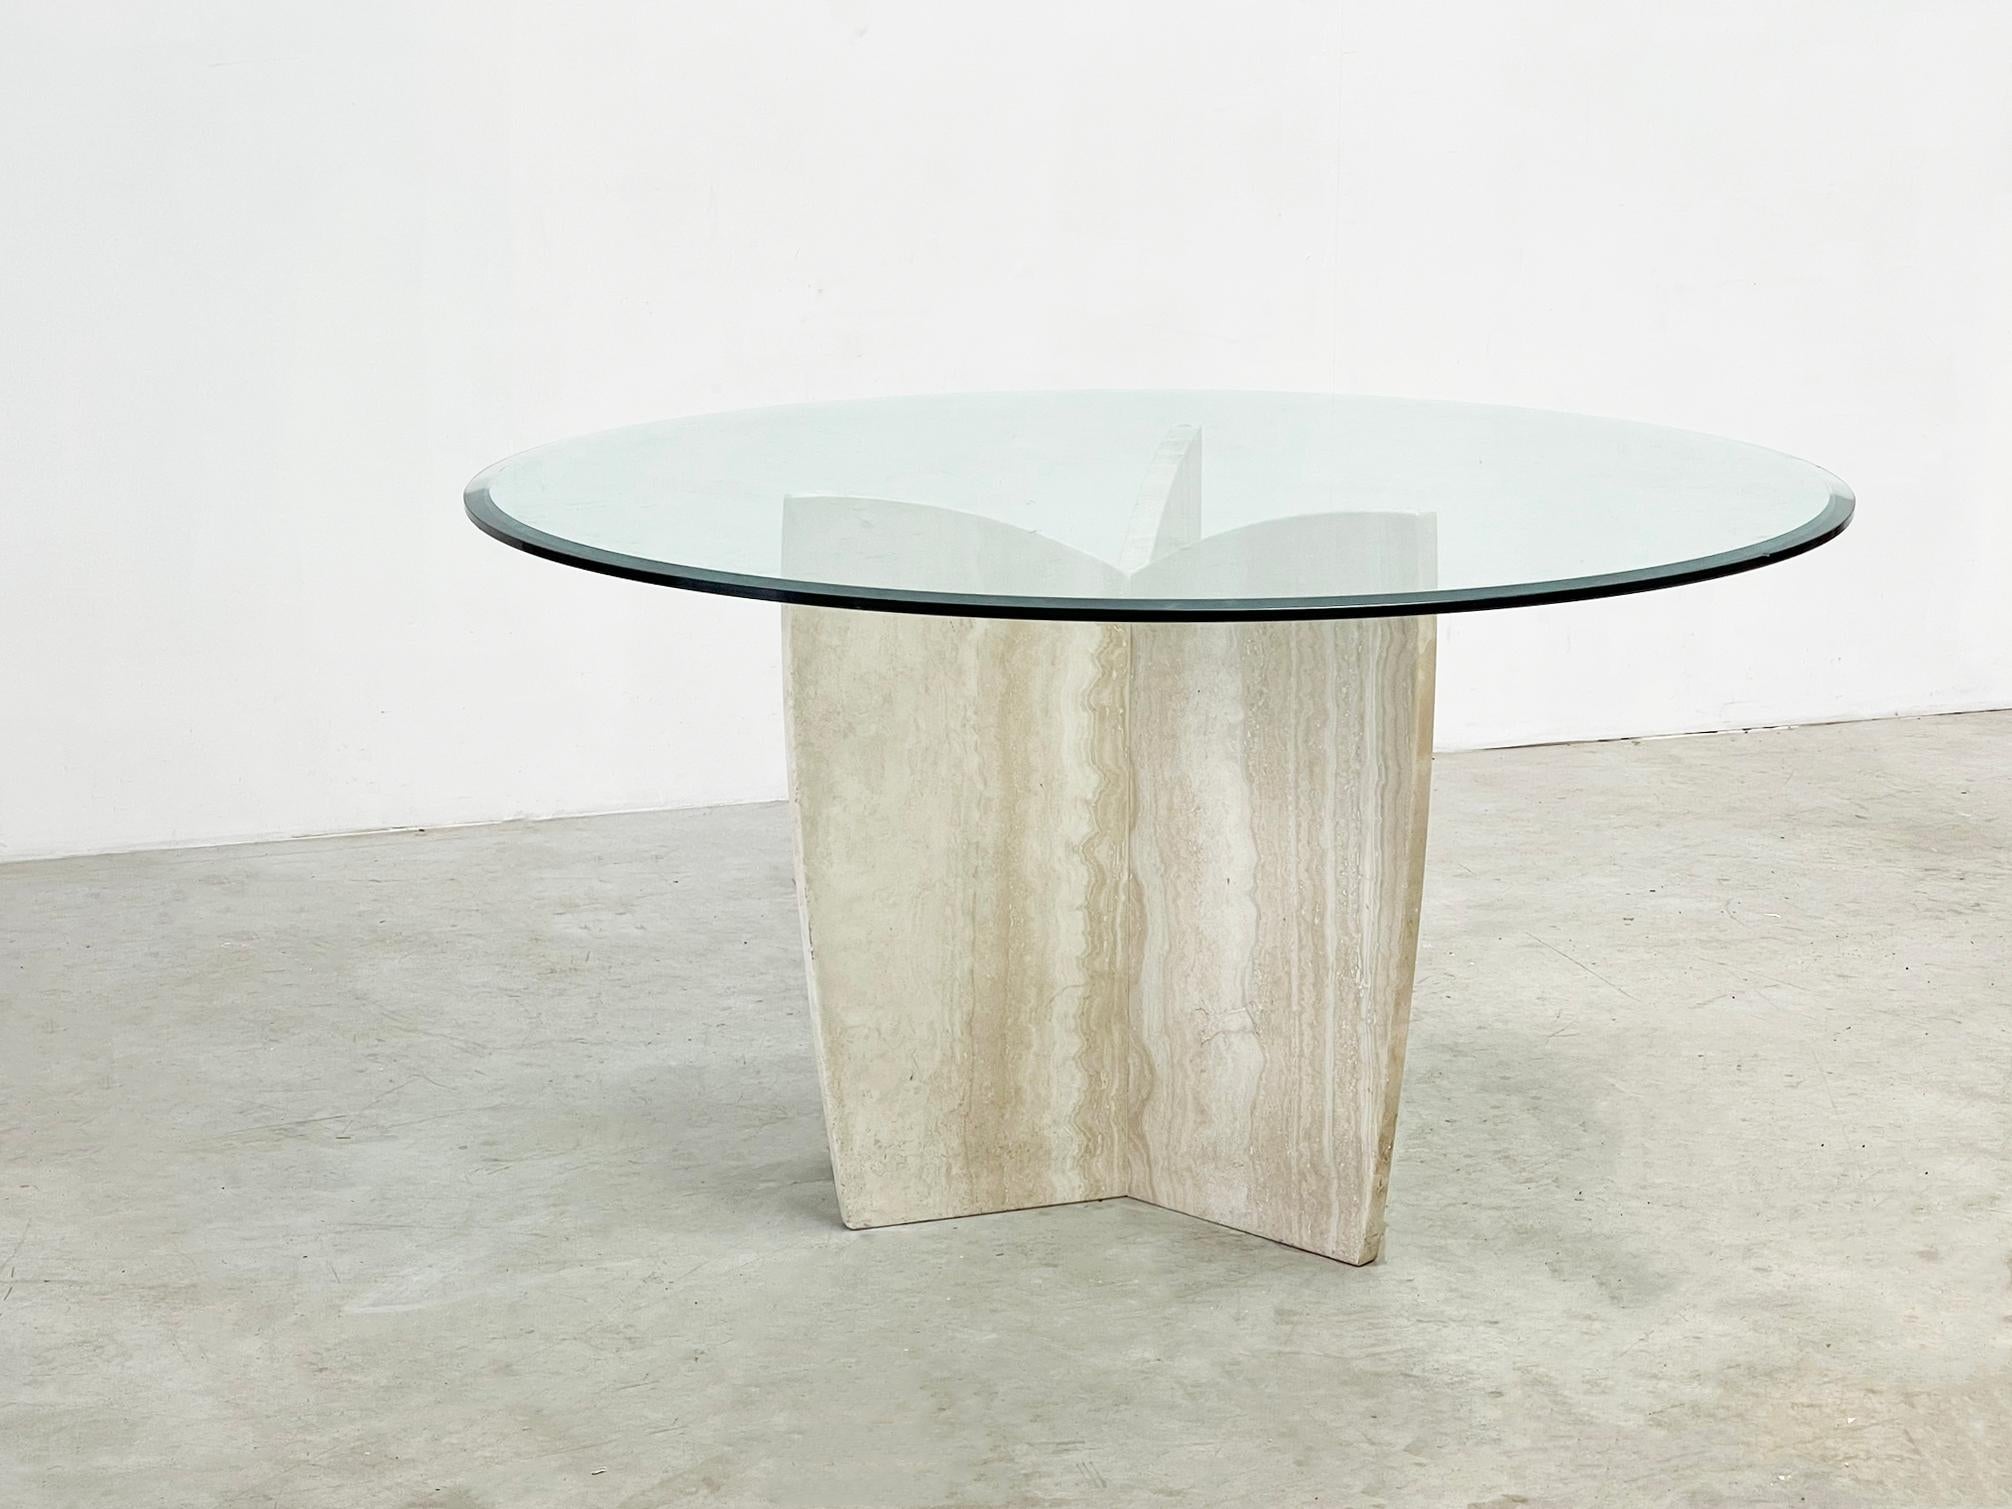  

This travertine dining table, featuring a glass tabletop, likely from  the 1980s out of Italy. Its sleek design and Italian craftsmanship make it a timeless centerpiece for any dining space. You can easy fit 6 persons around the table. 

The